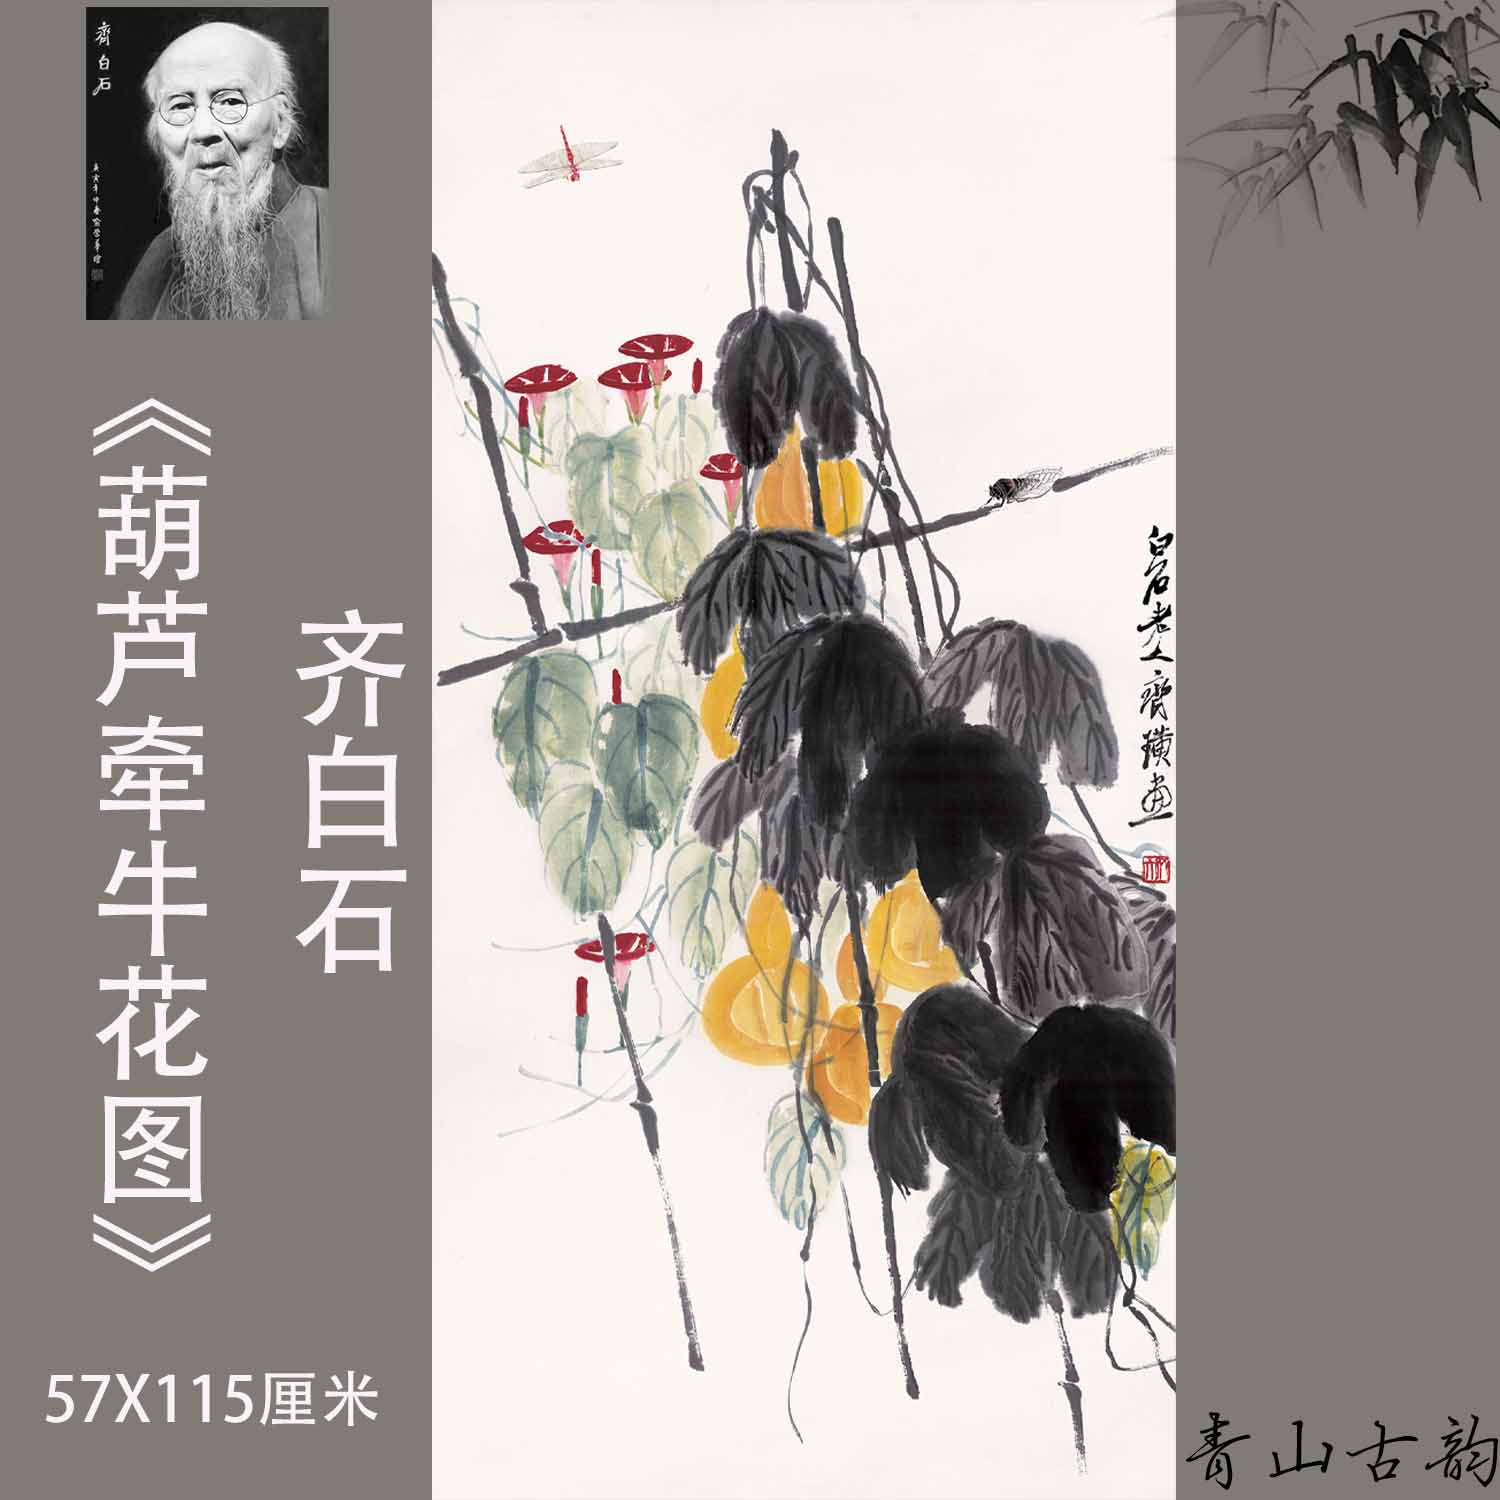 Chinese Antique Art Painting Qi Baishi Gourd Morning Glory Picture 齐白石 葫芦 牵牛花图